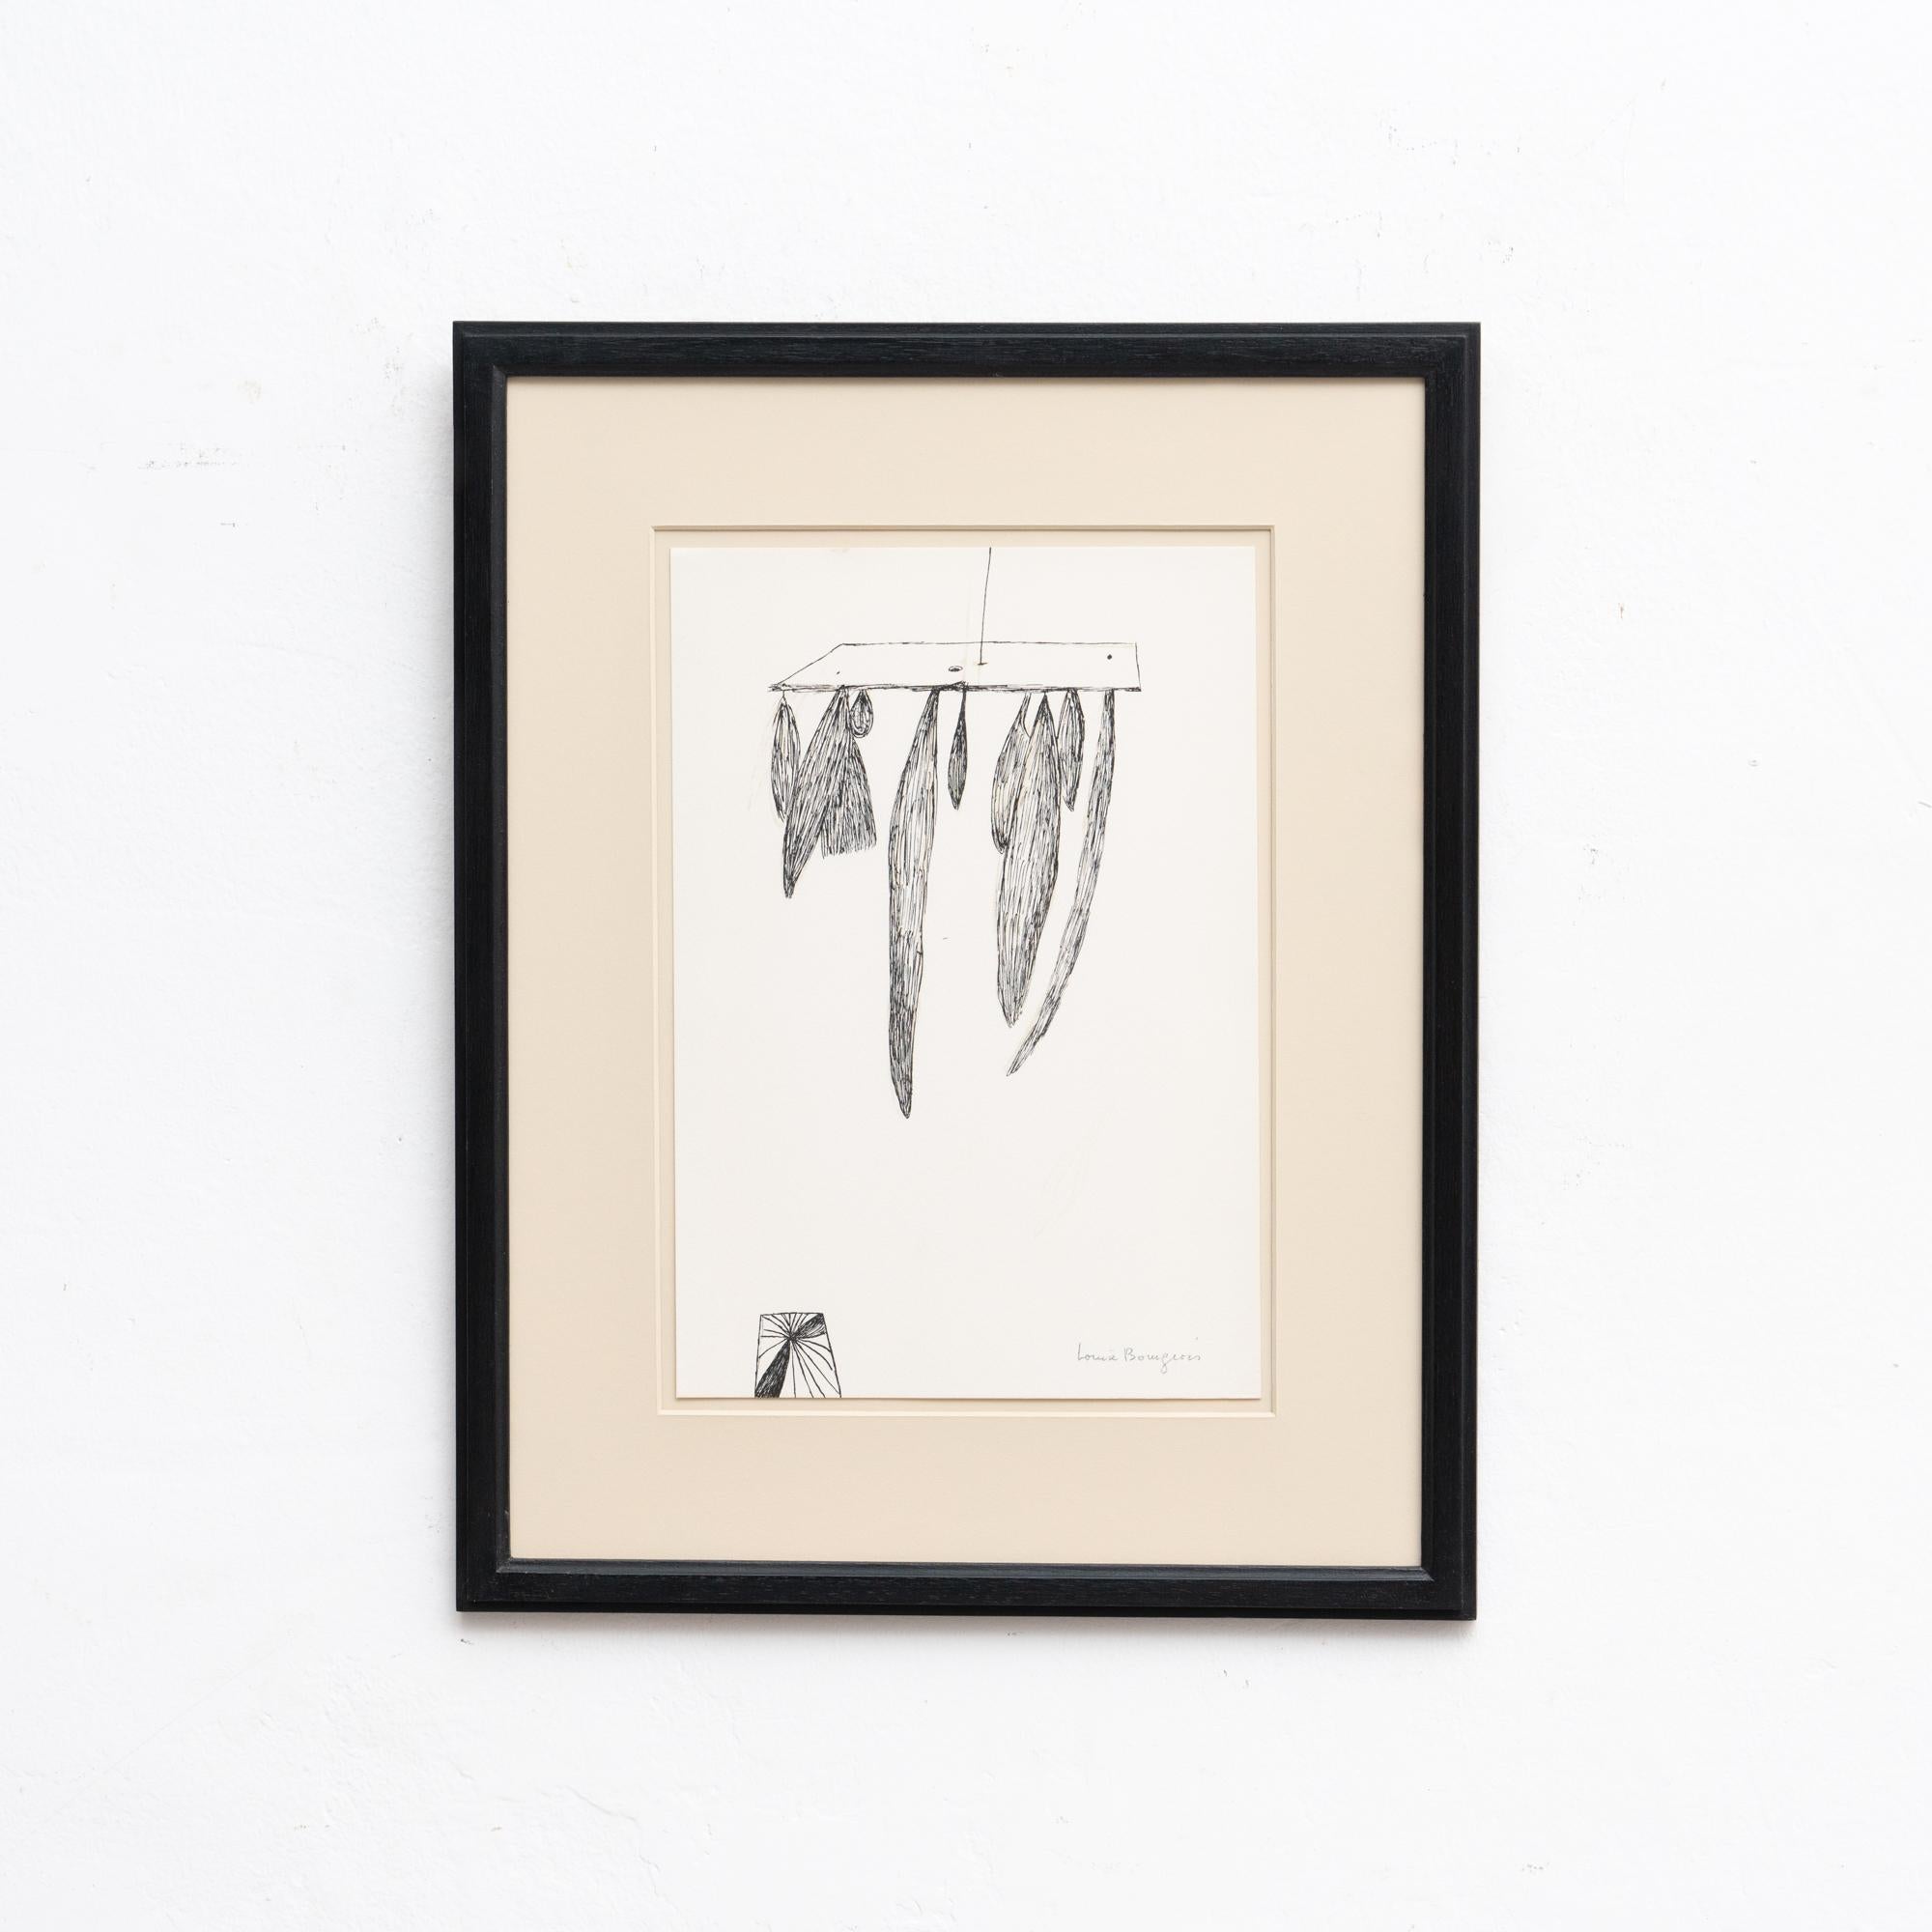 Louise Bourgeois 'Sheaves' Lithography, 1985 For Sale 3